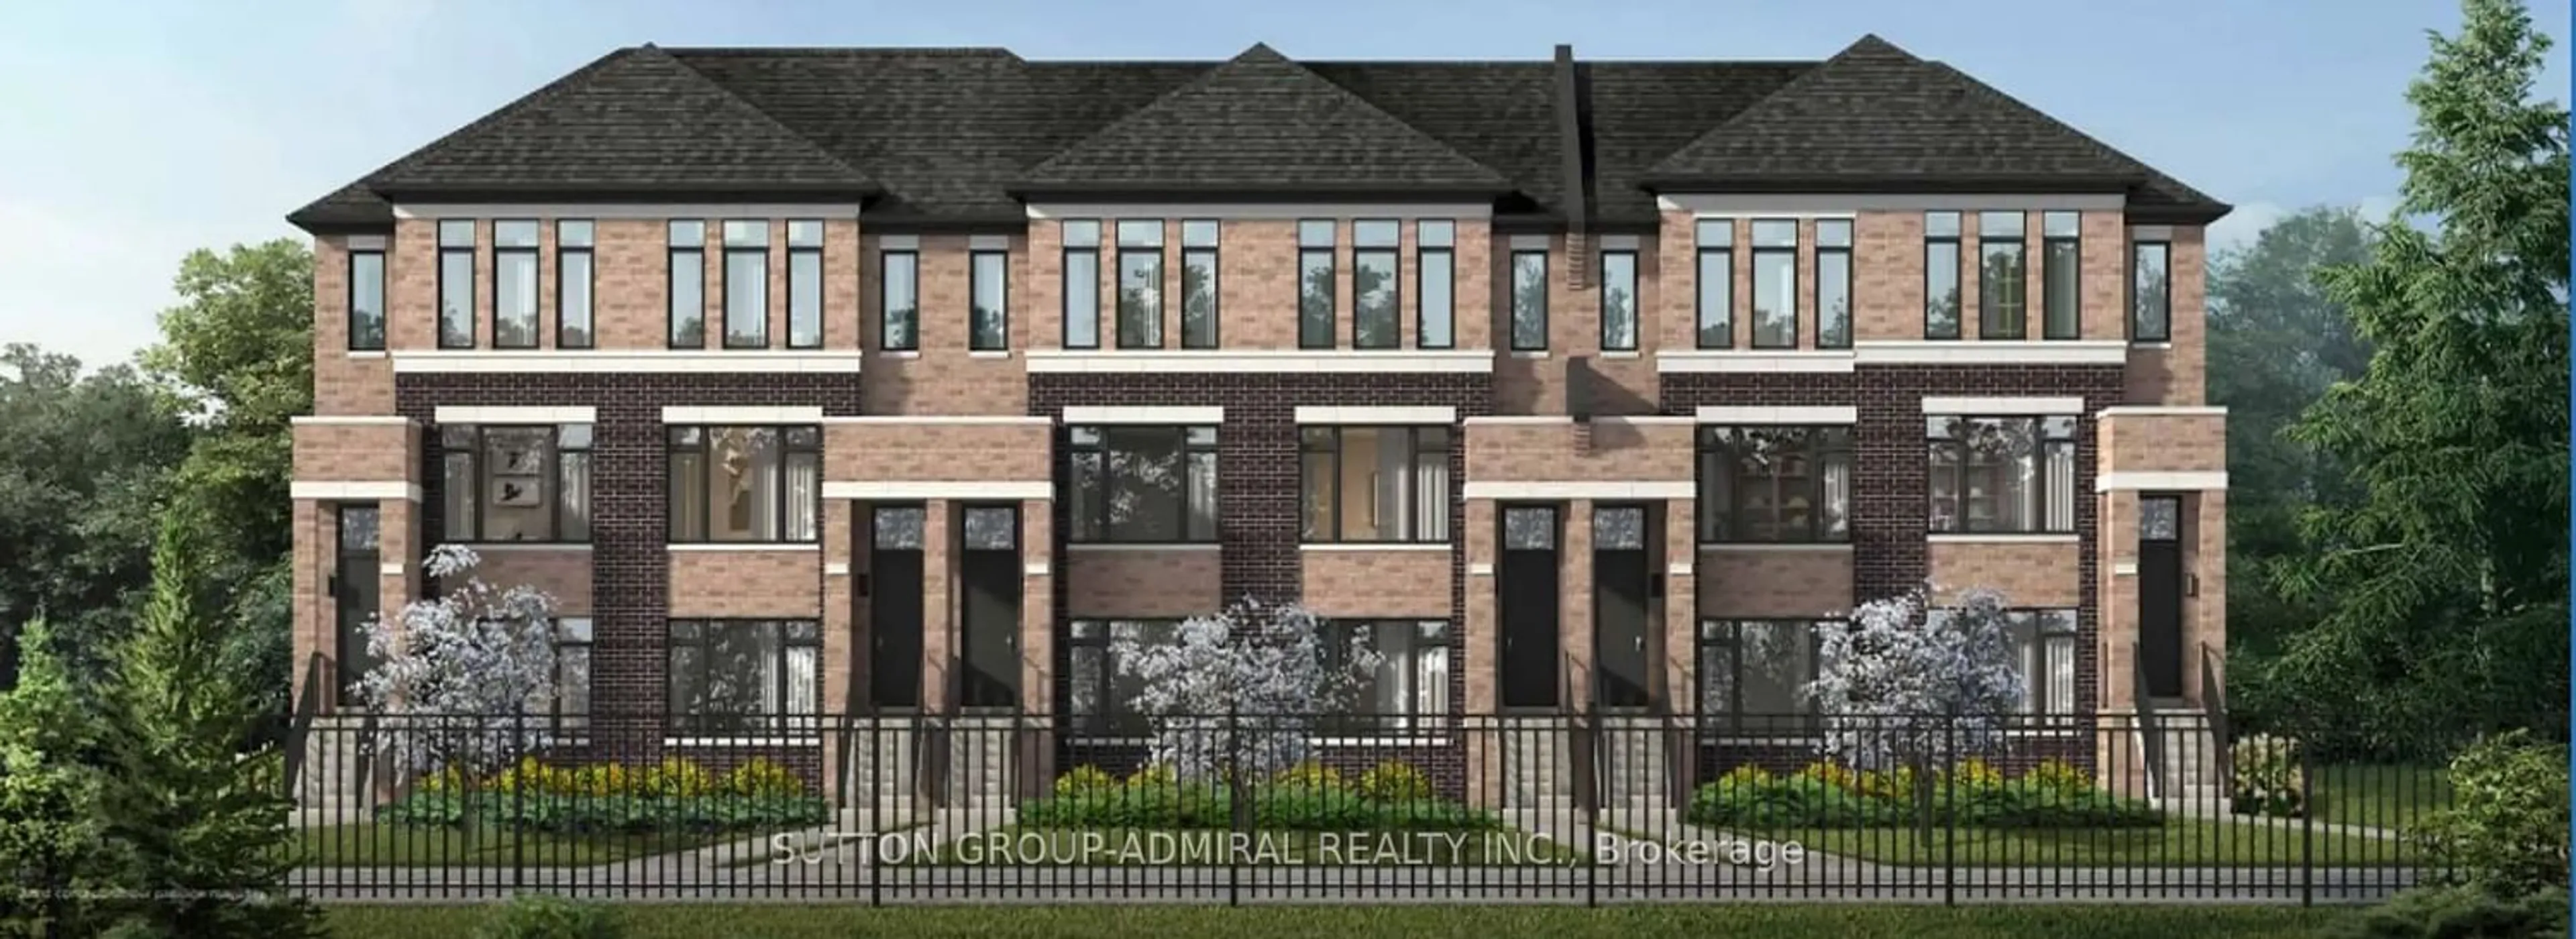 Home with brick exterior material for 17 Cherry Hill Lane, Barrie Ontario L4N 6K7